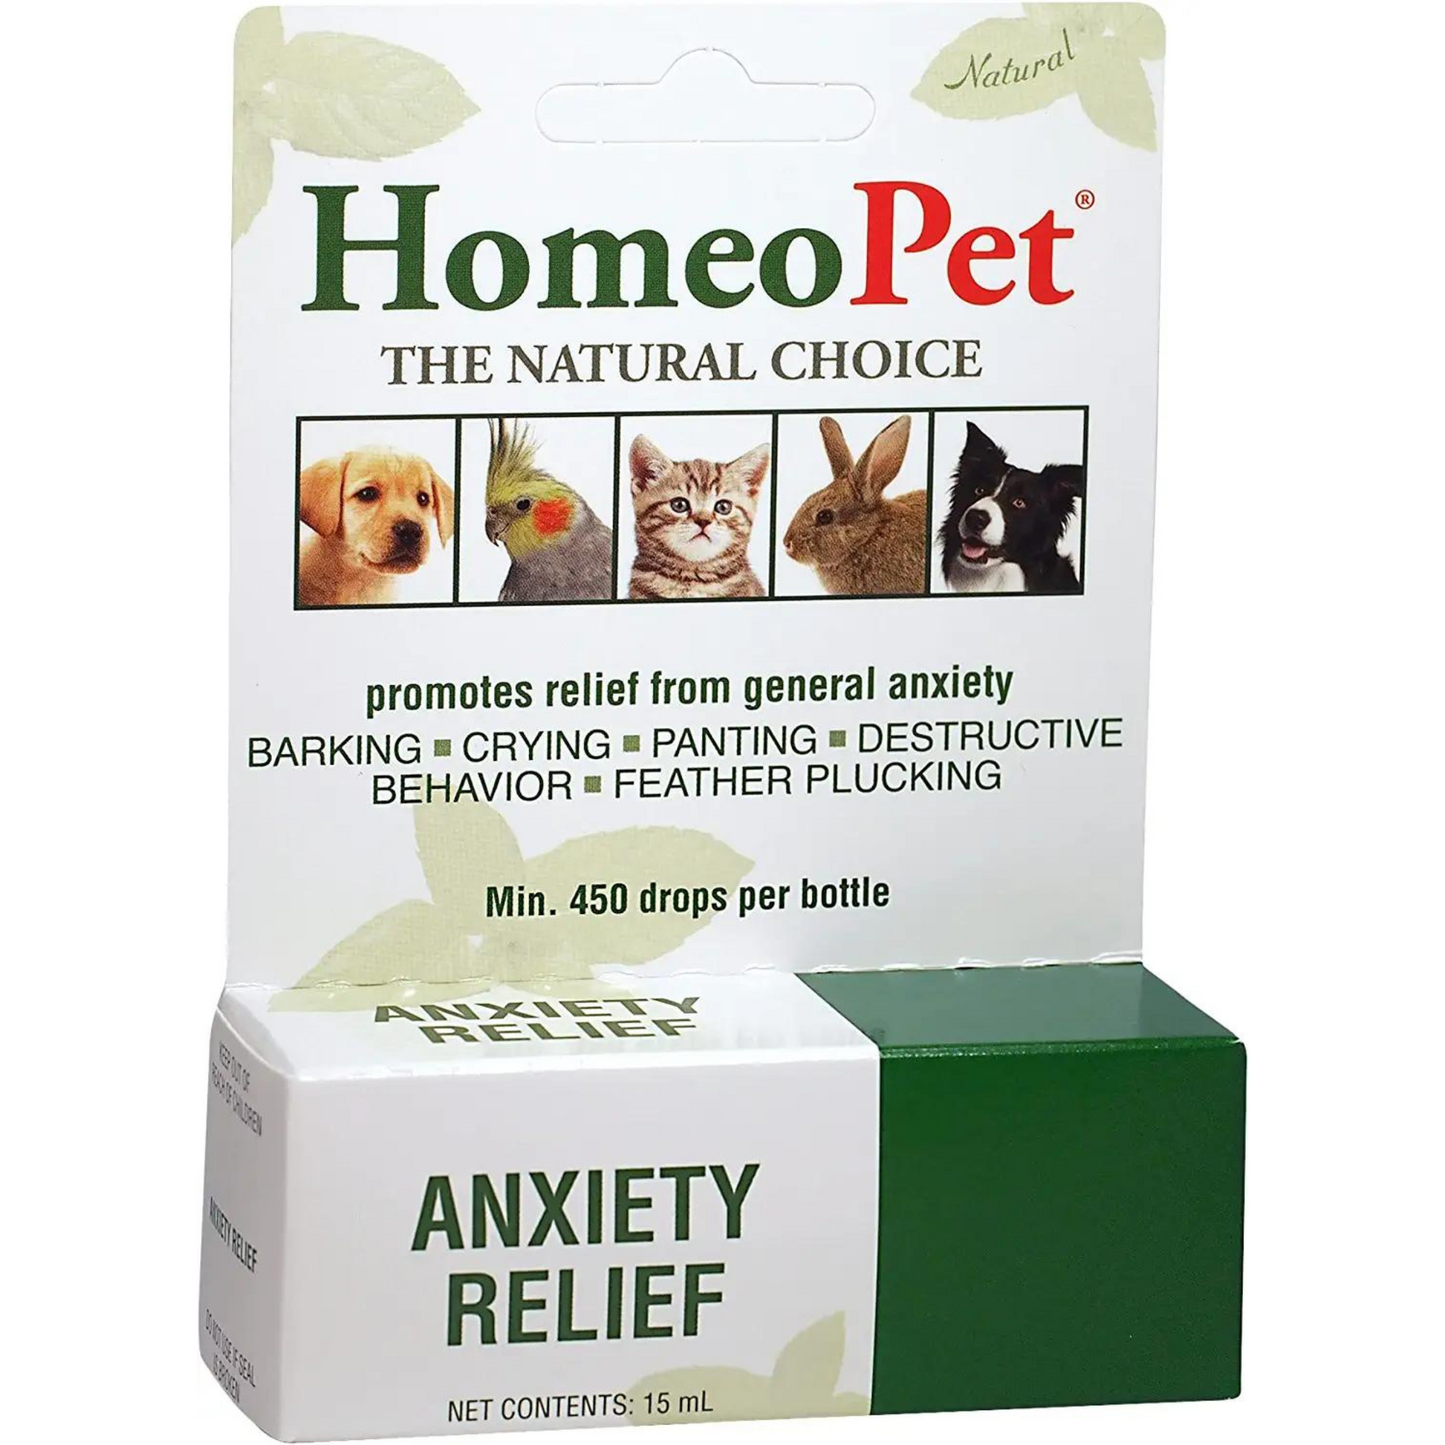 Primary image of Anxiety Remedy